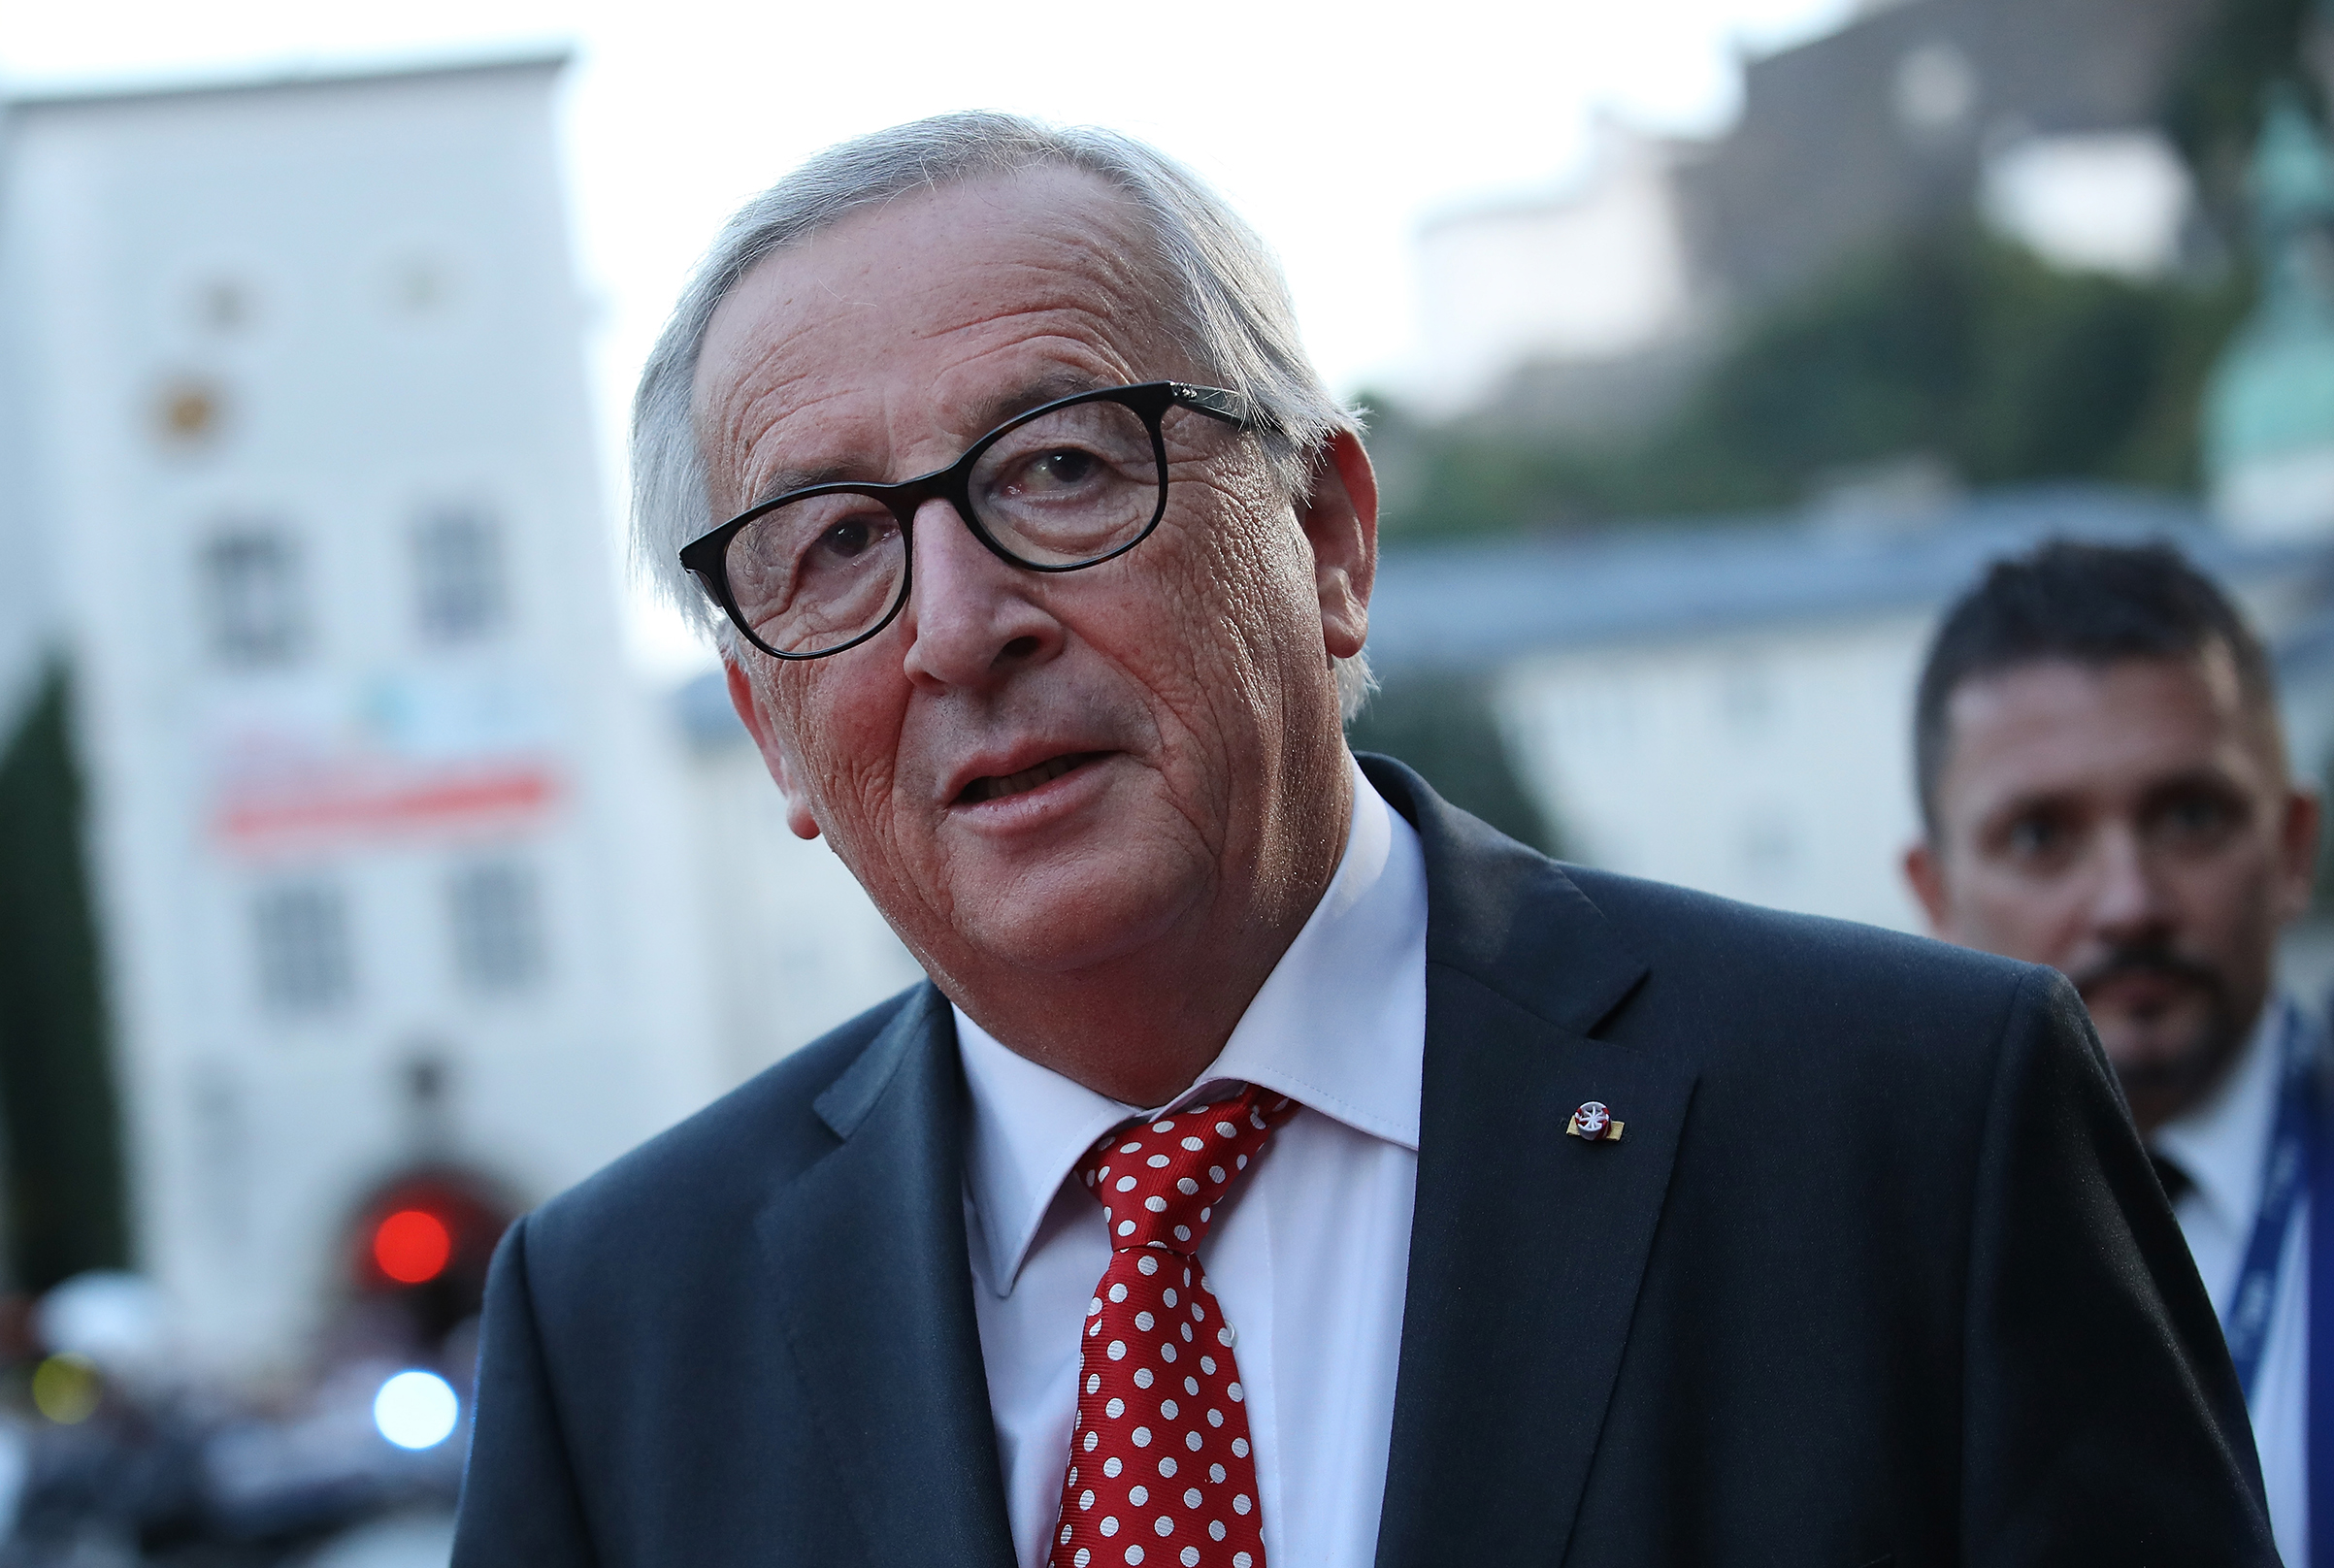 Jean-Claude Juncker, President of the European Commission, arrives at an informal summit of leaders of the European Union on September 19, 2018 in Salzburg, Austria. High on the agenda of the two-day summit is migration policy. (Sean Gallup—Getty Images)